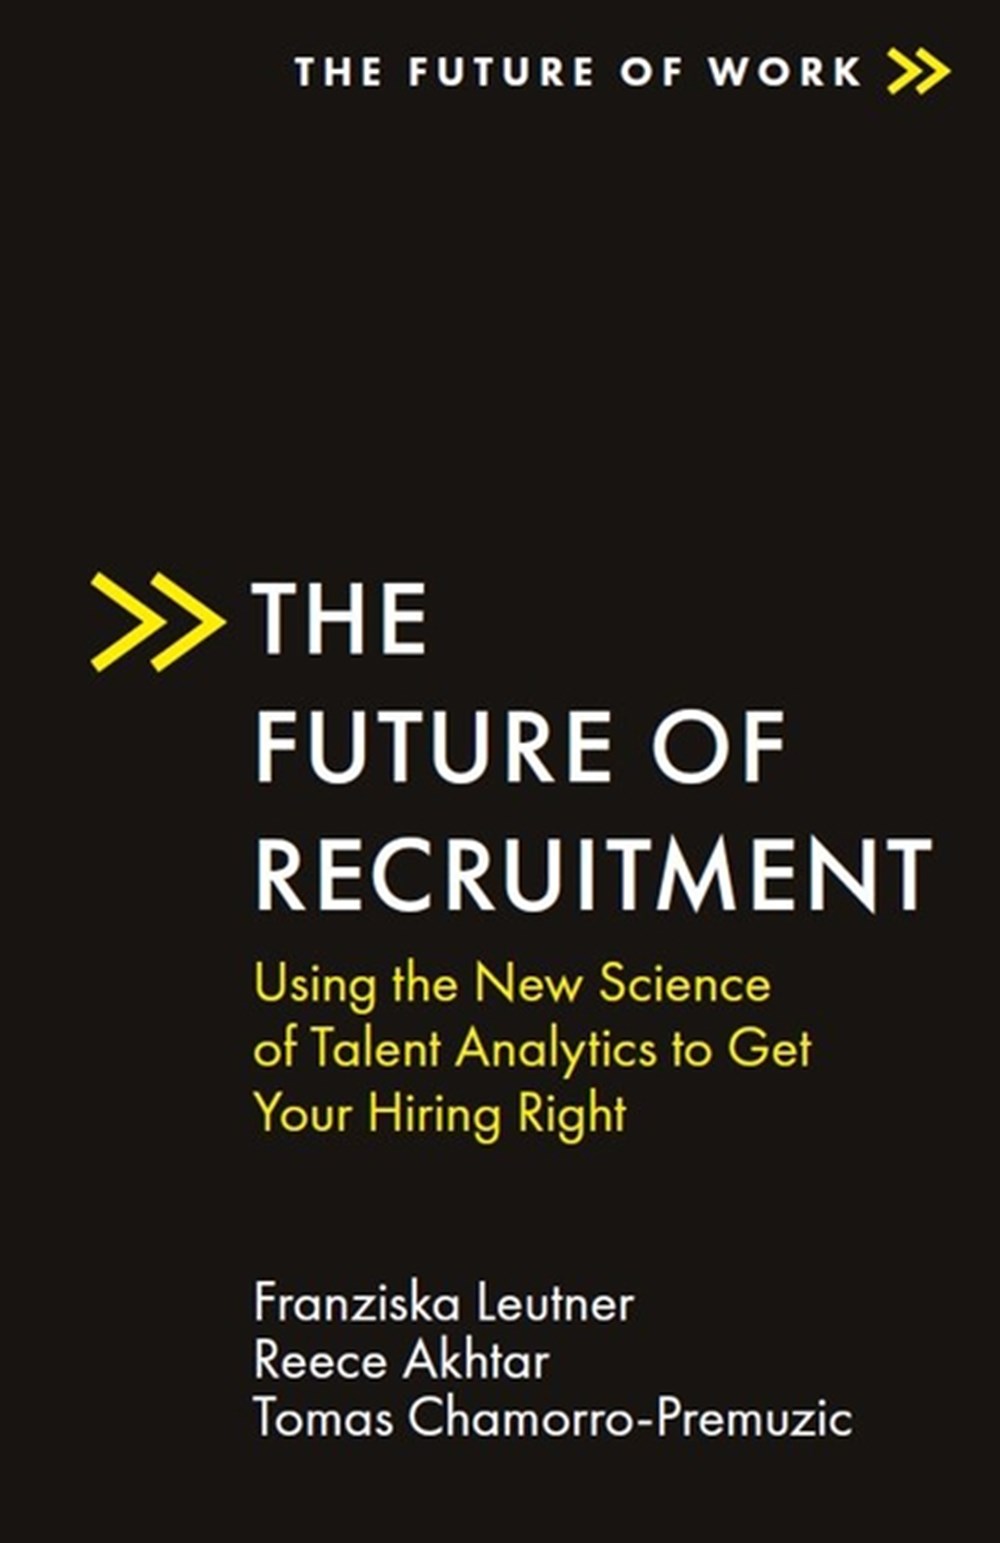 Future of Recruitment: Using the New Science of Talent Analytics to Get Your Hiring Right